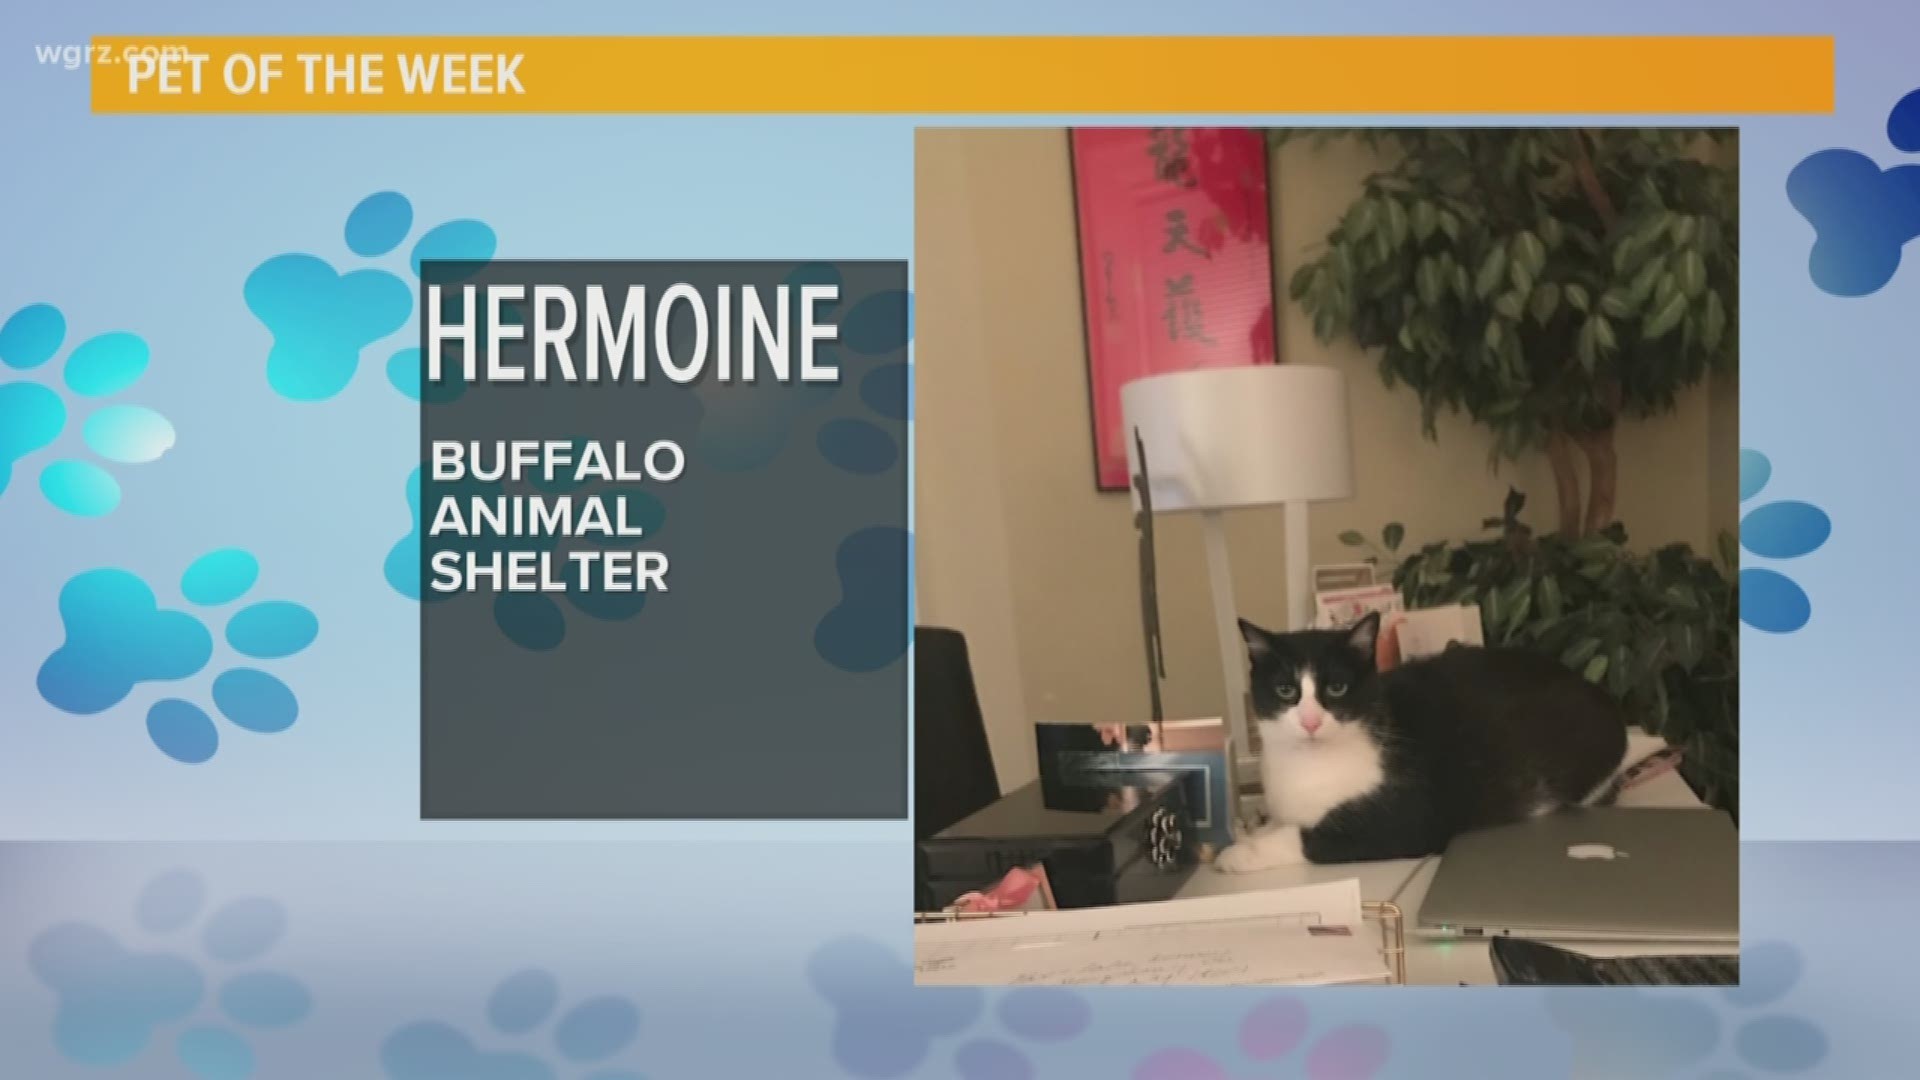 Meet Hermione! This pretty kitty is looking for her furrever home!